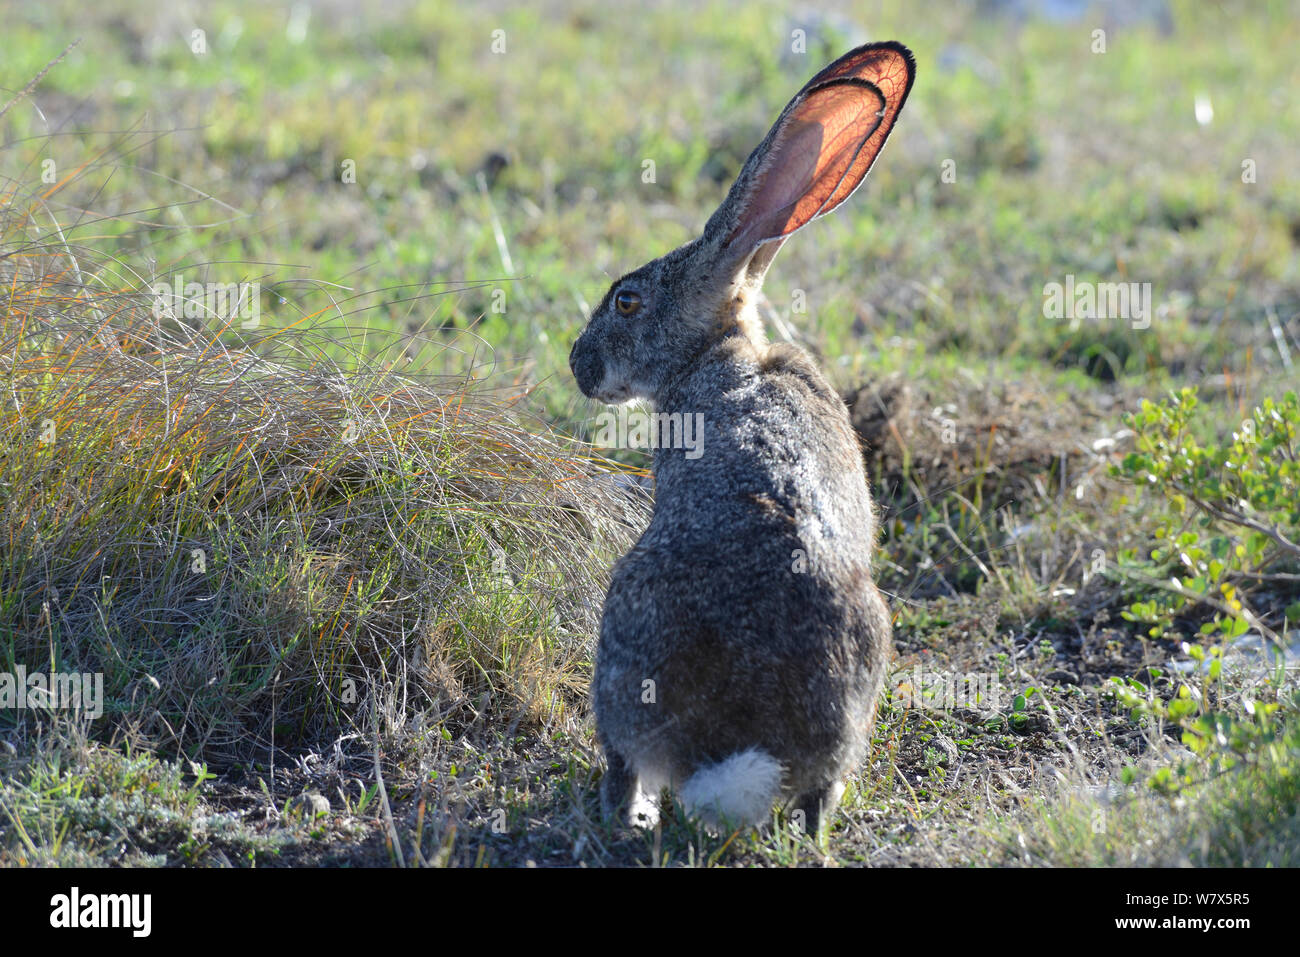 Cape hare (Lepus capensis) sitting in grassy fynbos. De Hoop Nature Reserve, Western Cape, South Africa. Stock Photo